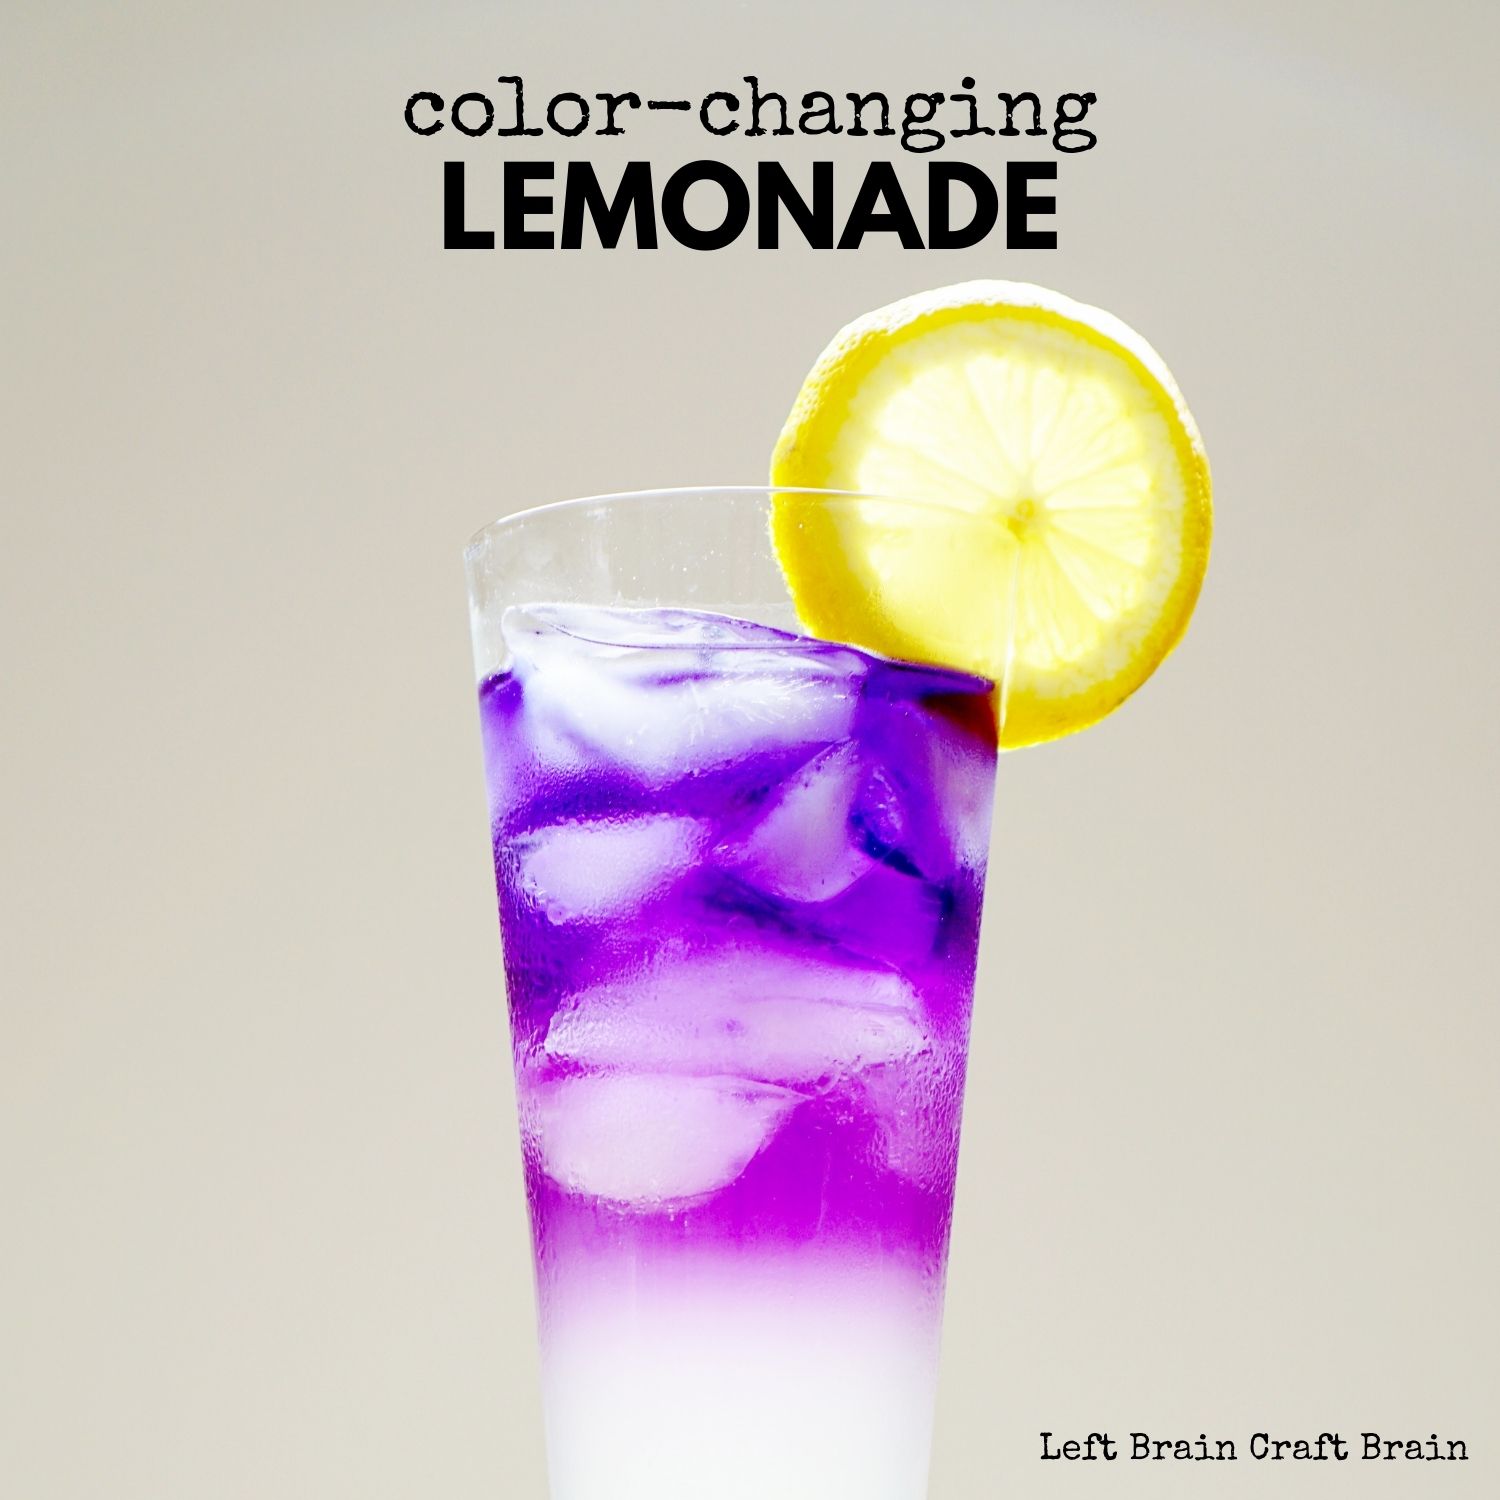 Make some color changing lemonade for a delicious and exciting edible science experiment. Perfect for STEM education at school and home. Or perfect for a summer party, too! Adds wow to any time you drink a glass of lemonade!